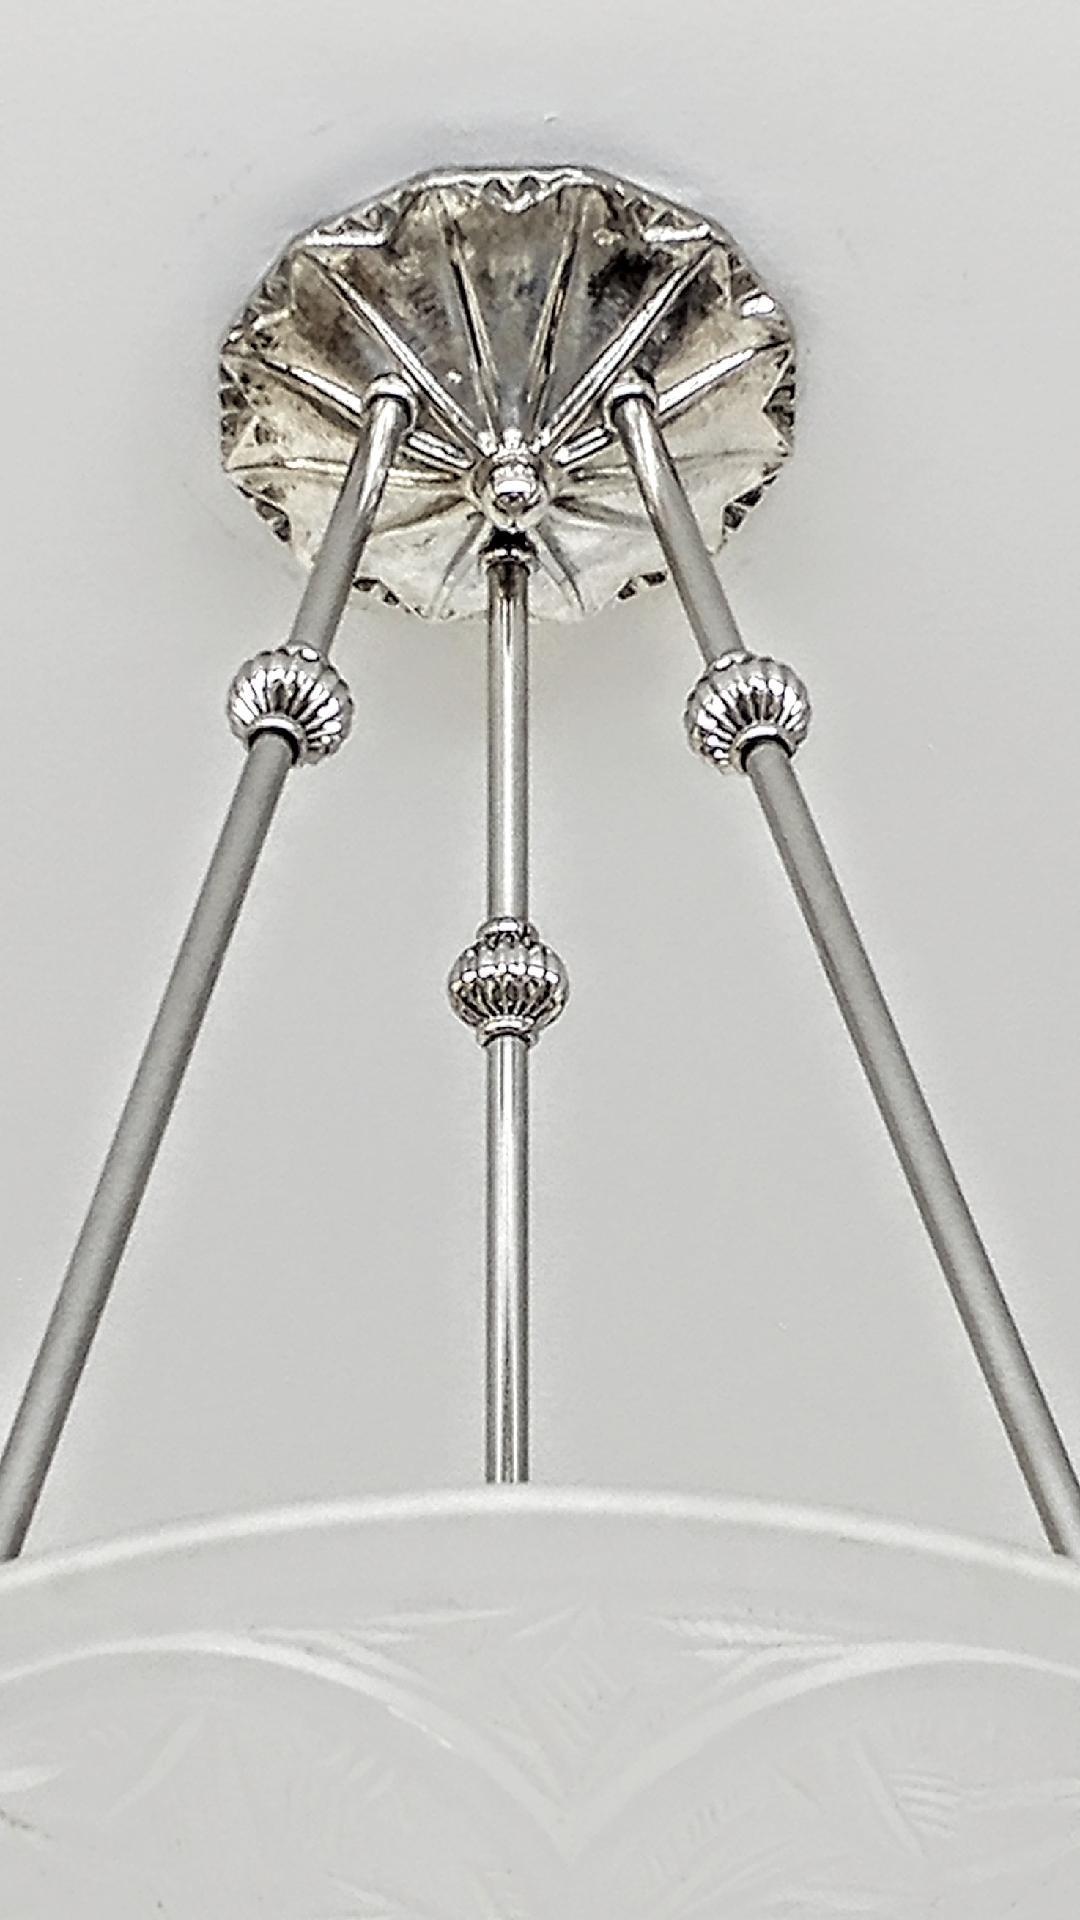 Glass French Art Deco Flush Mount or Pendant Chandelier by Muller Freres Pair Avai. For Sale